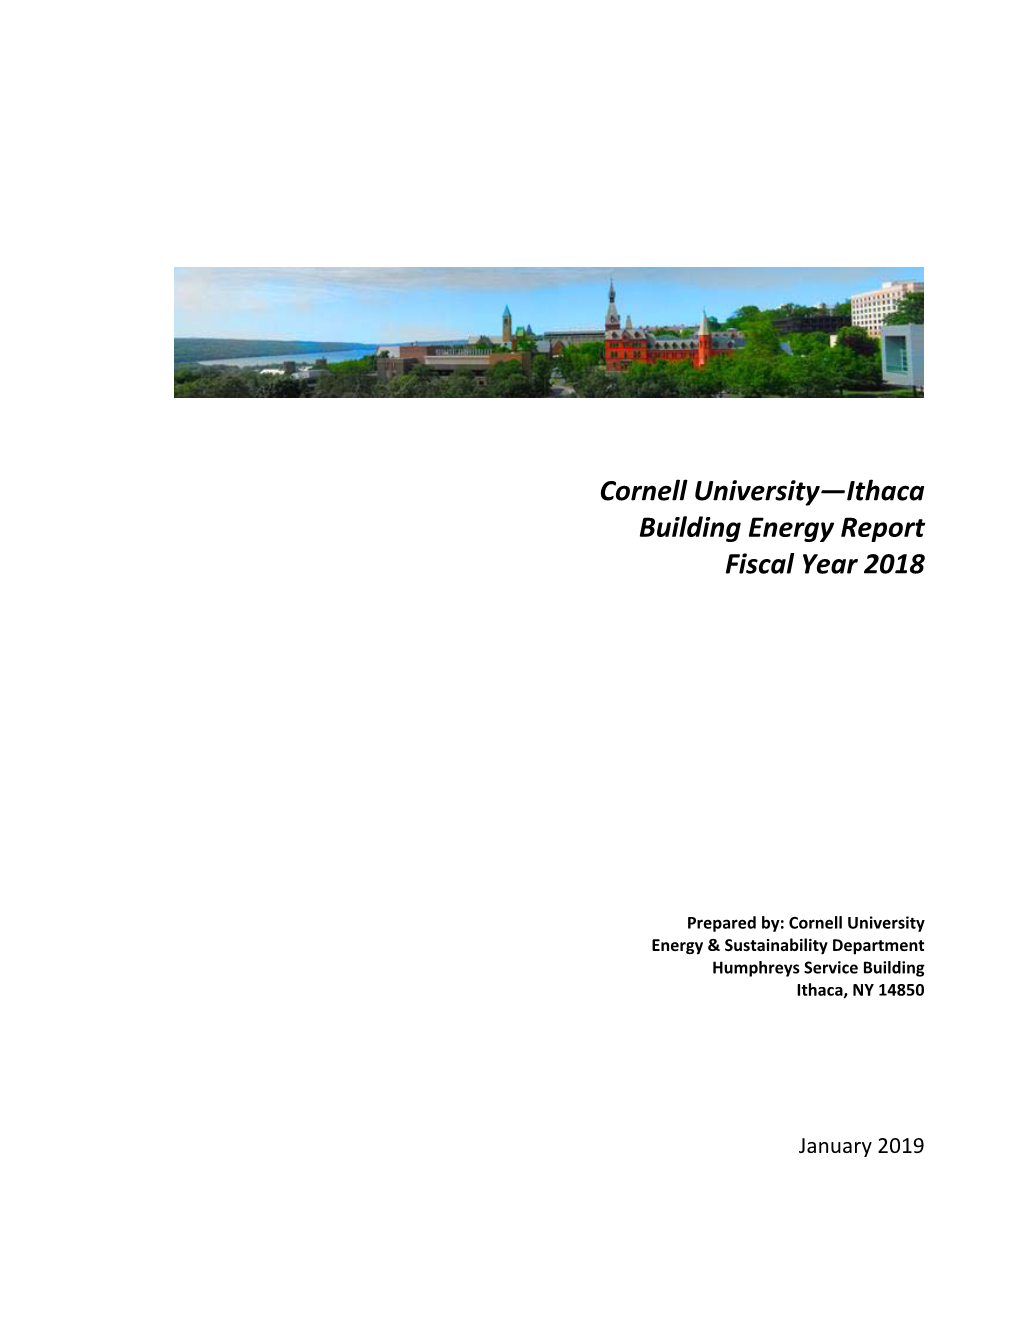 Cornell University—Ithaca Building Energy Report Fiscal Year 2018